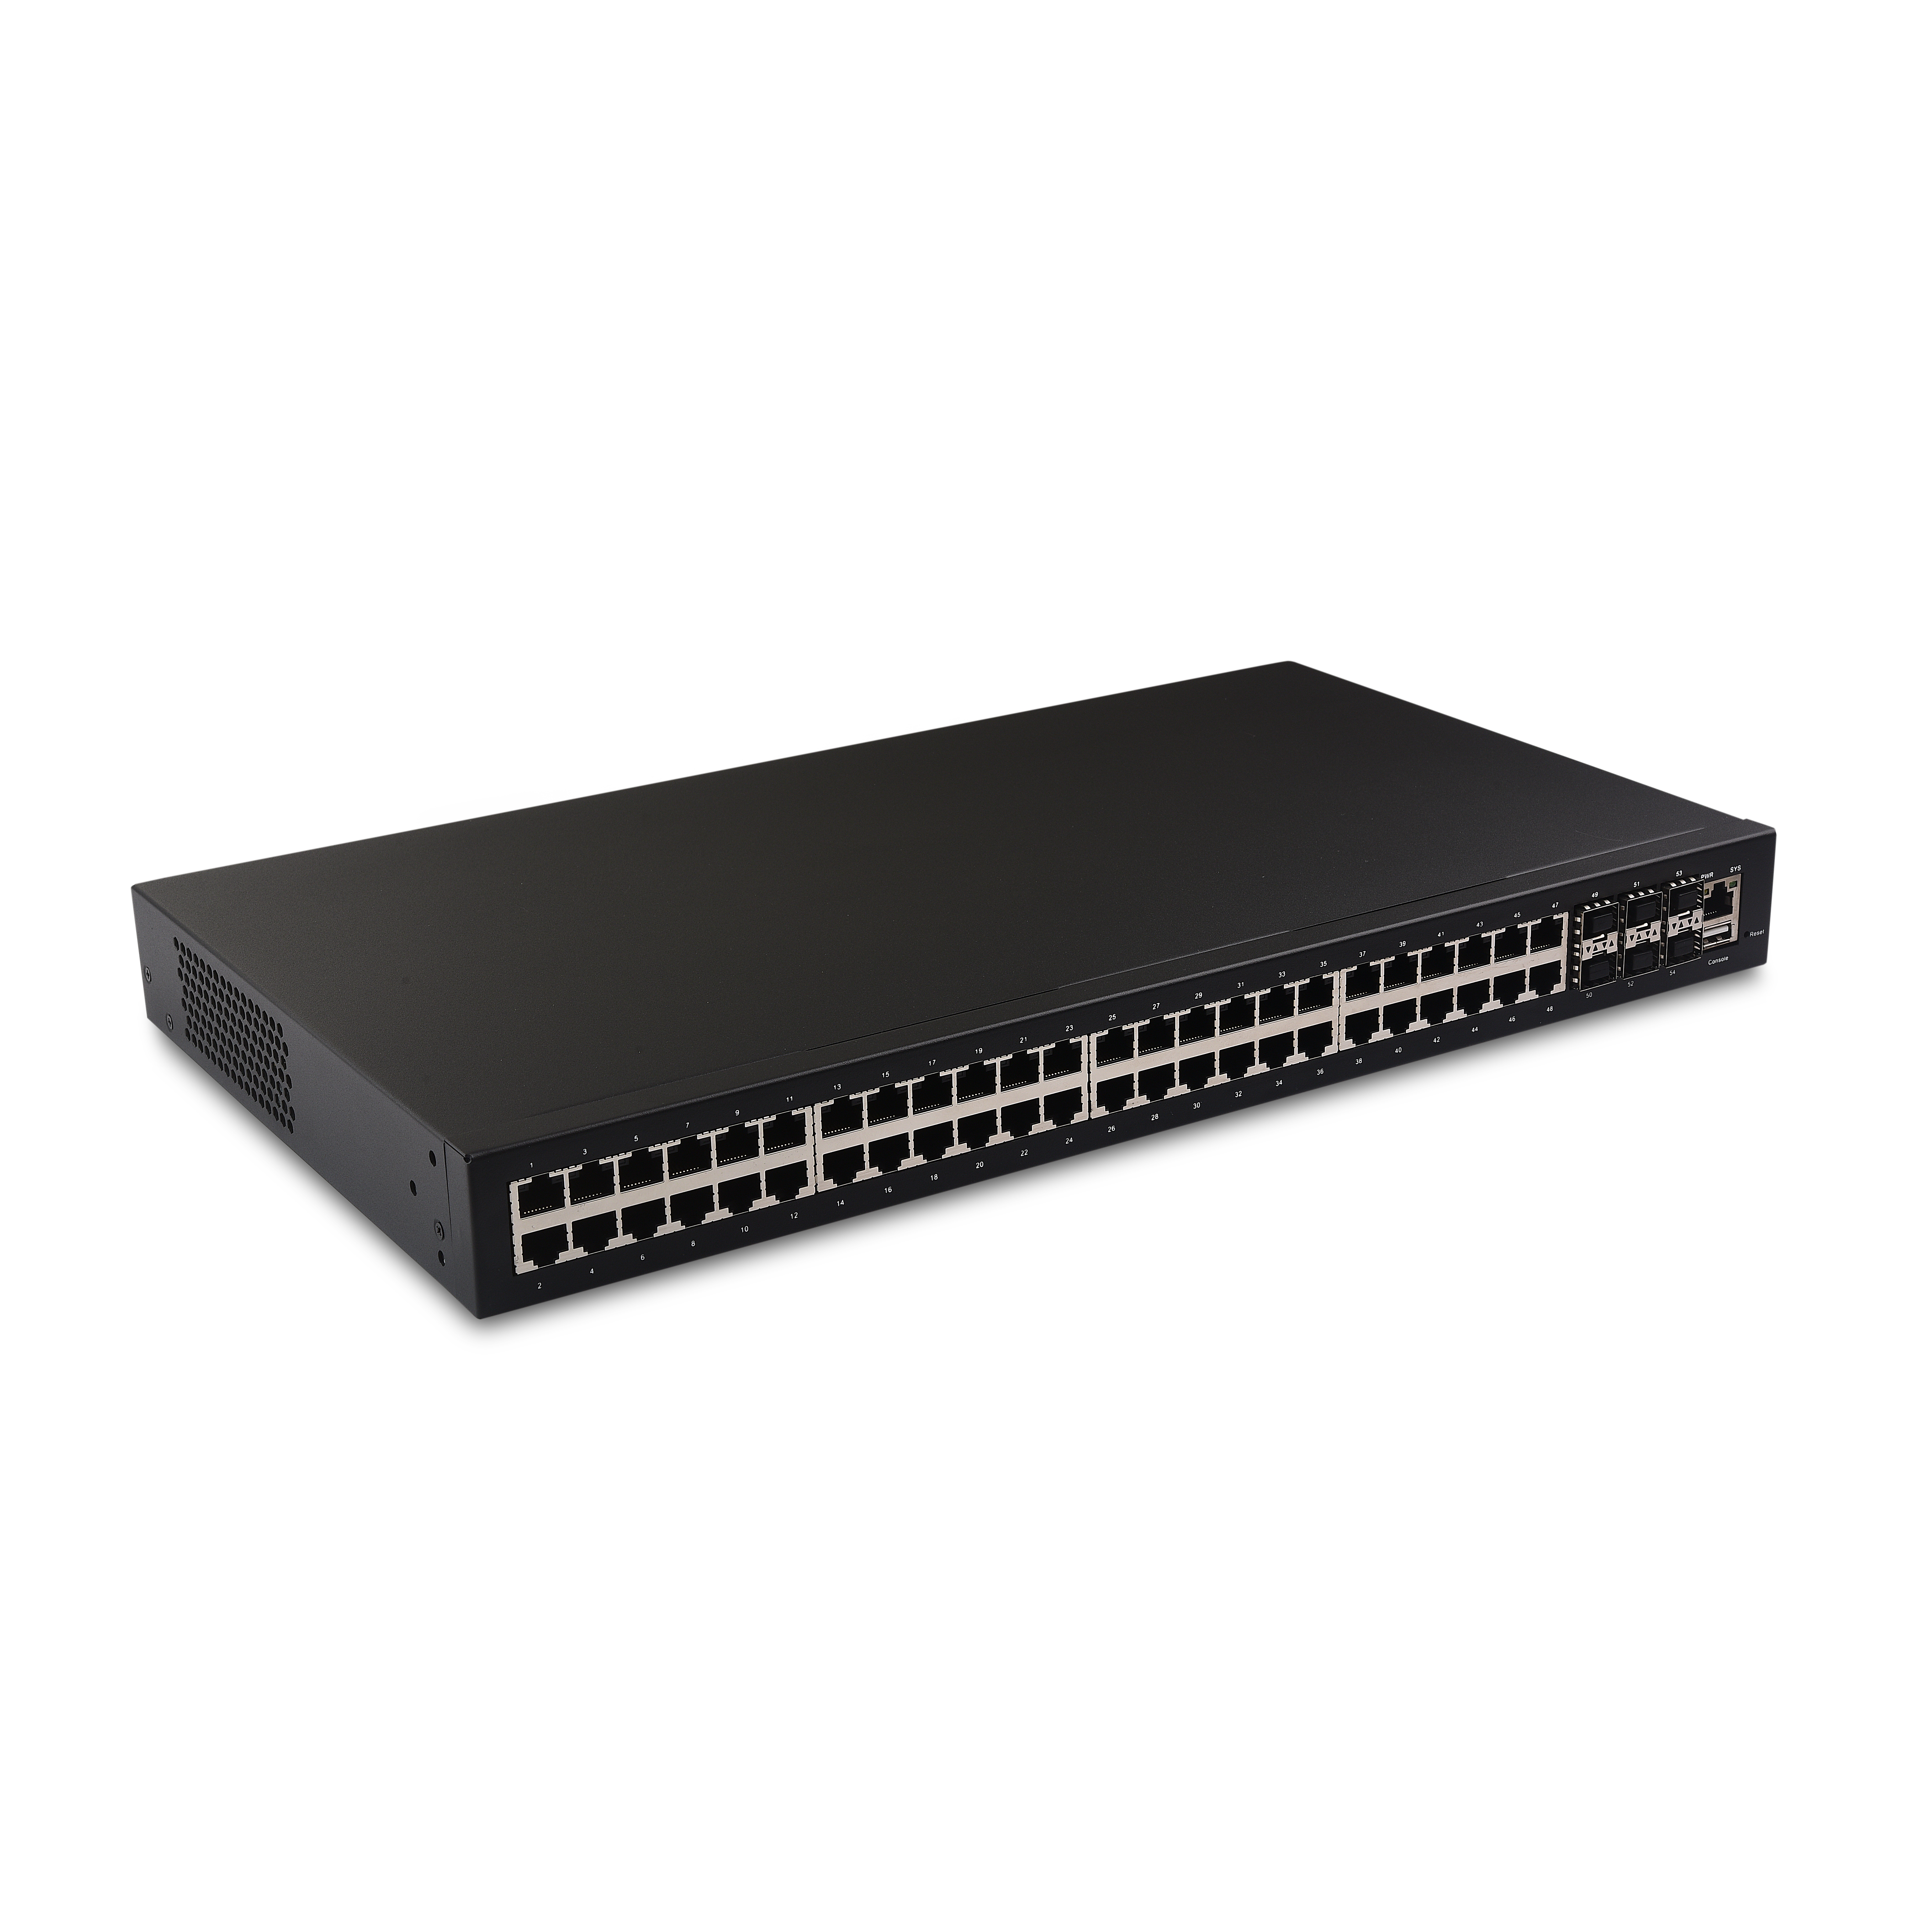 https://www.jha-tech.com/managed-fiber-ethernet-switchwith-610g-sfp-slot48101001000m-ethernet-port-jha-smw0648-products/